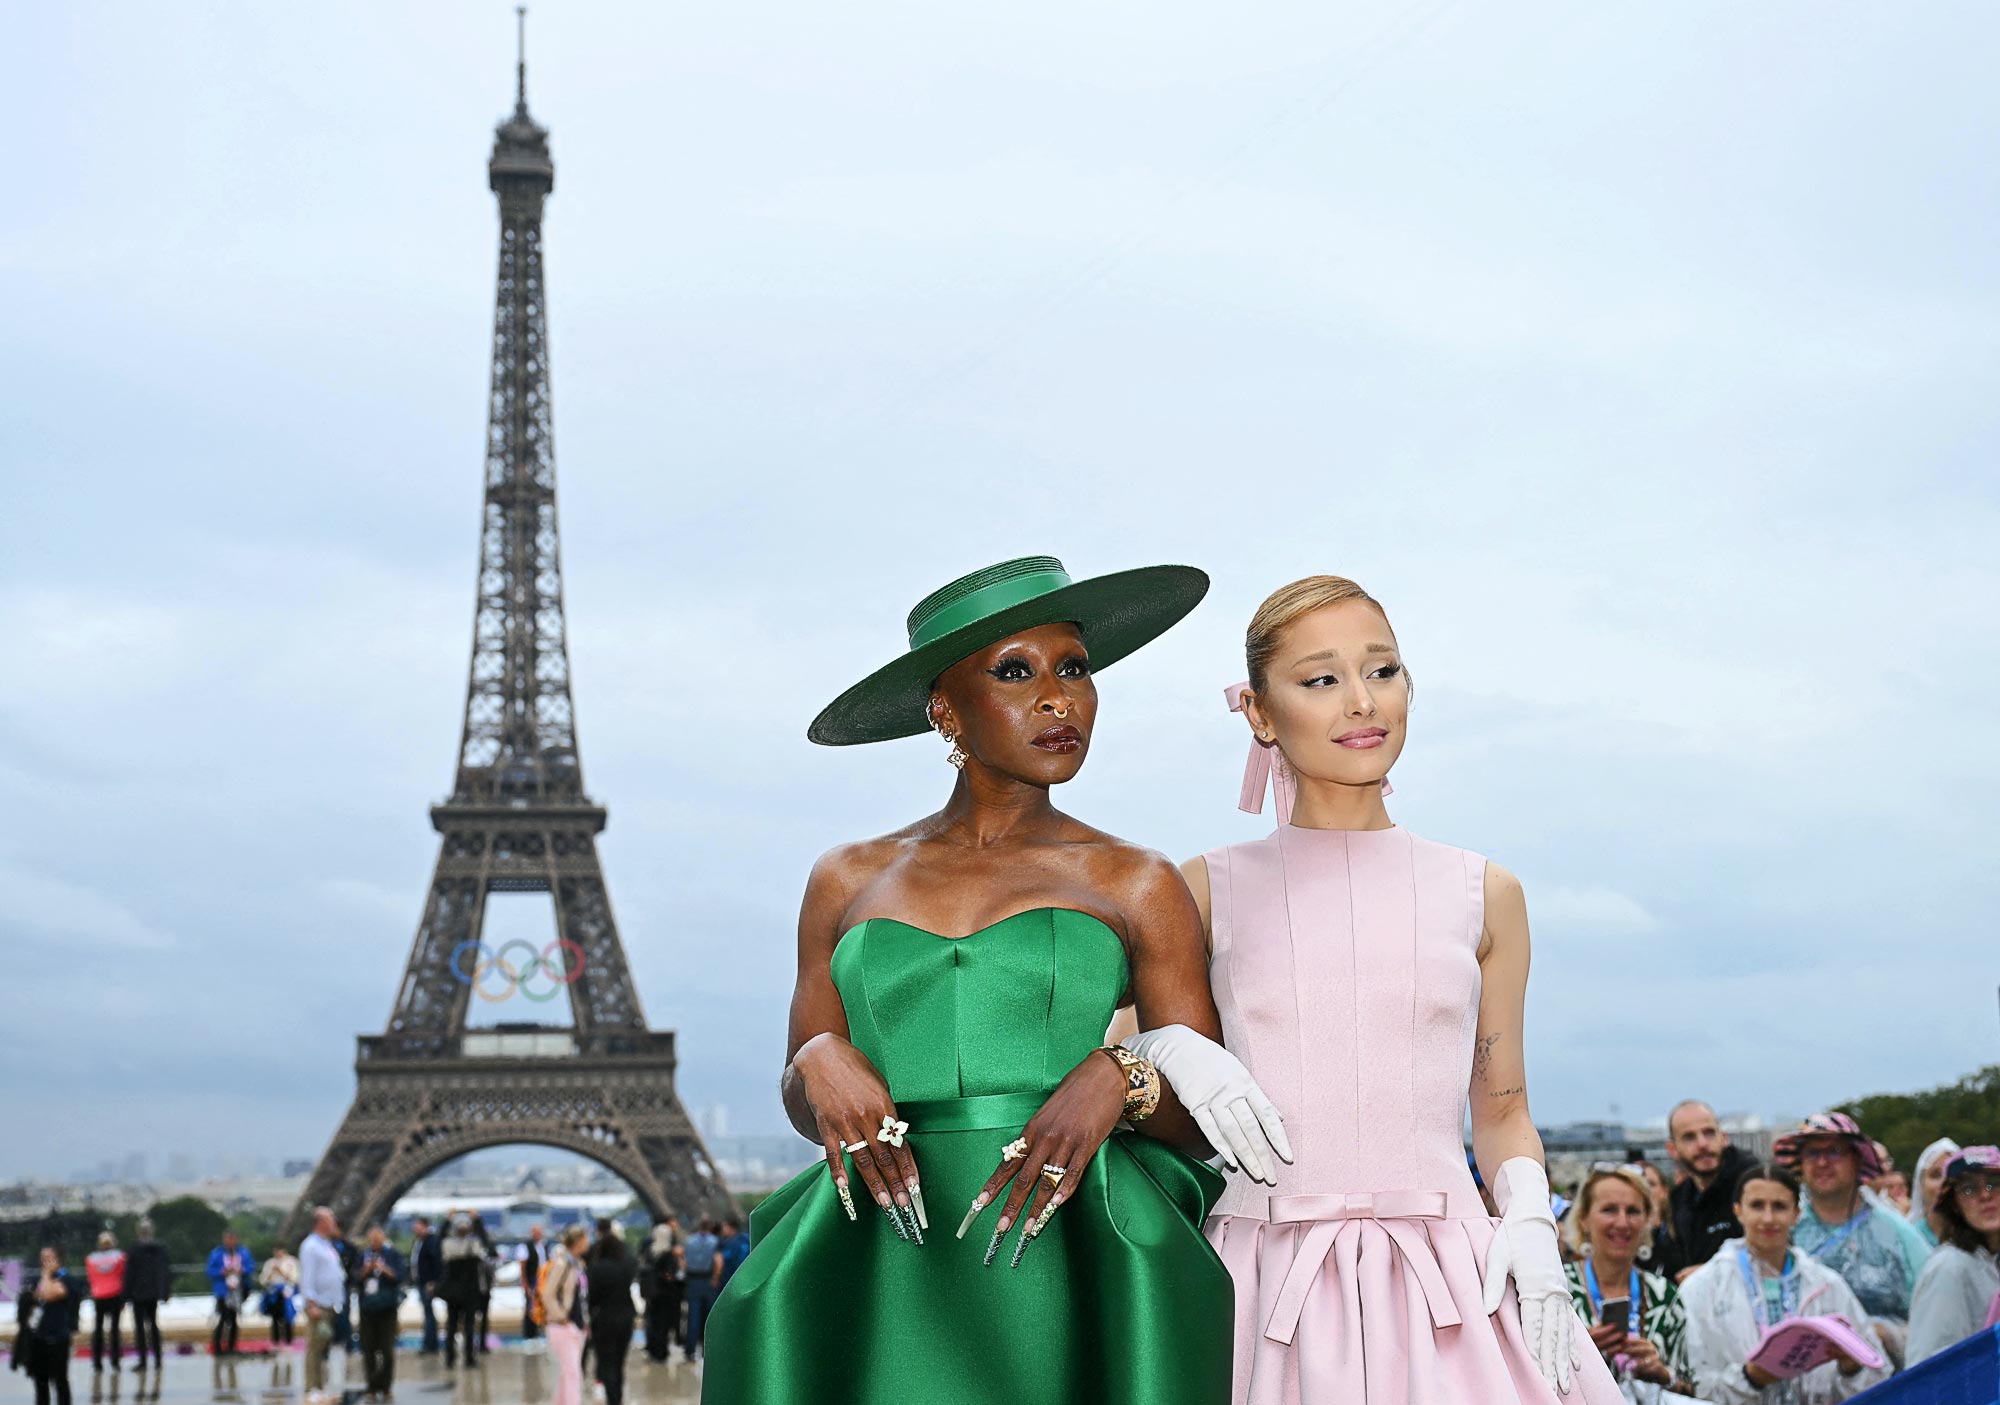 Ariana Grande and Cynthia Erivo Are Wickedly Stunning at 2024 Paris Olympics 305